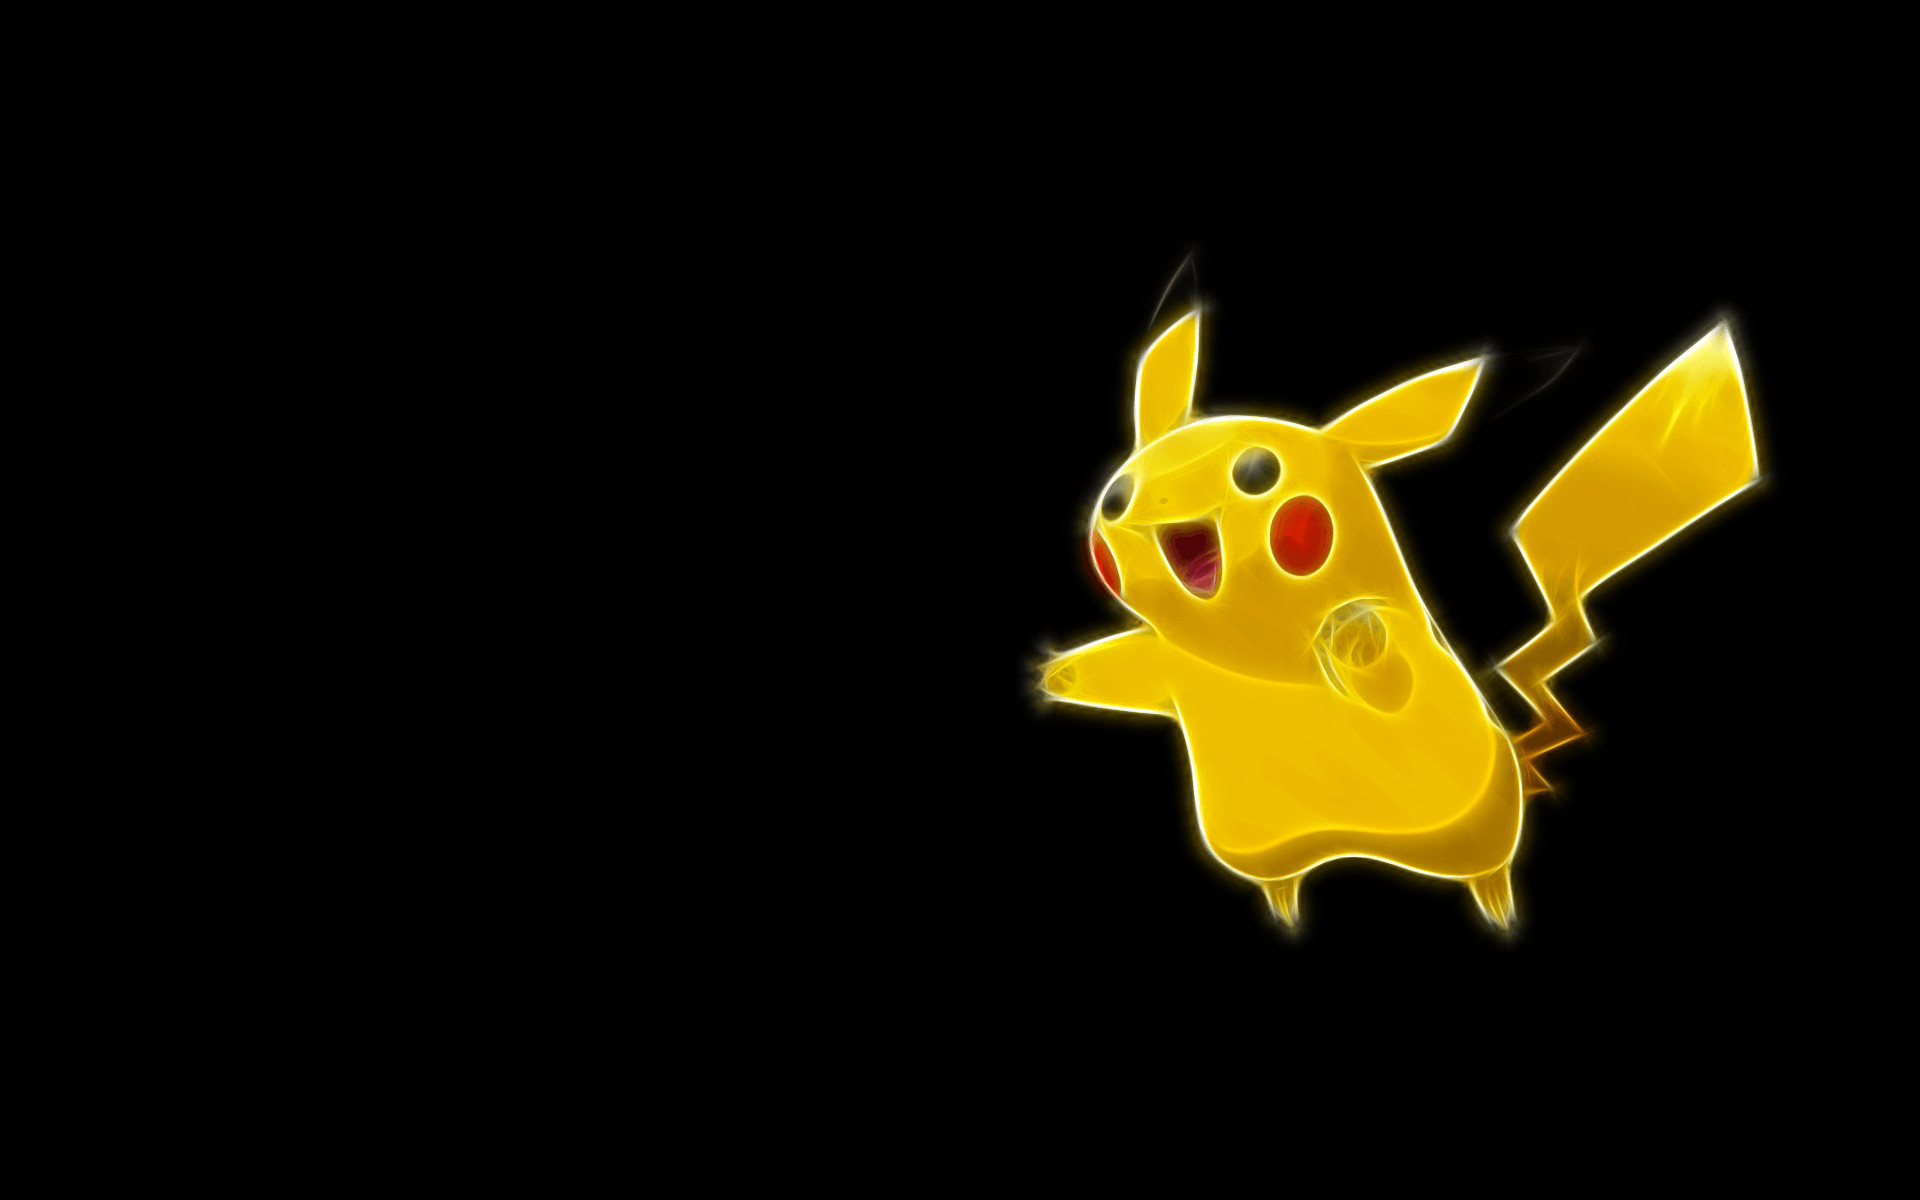 1920x1200 Related Pictures Pokemon Pikachu Wallpapers Pikachu Wallpapers .